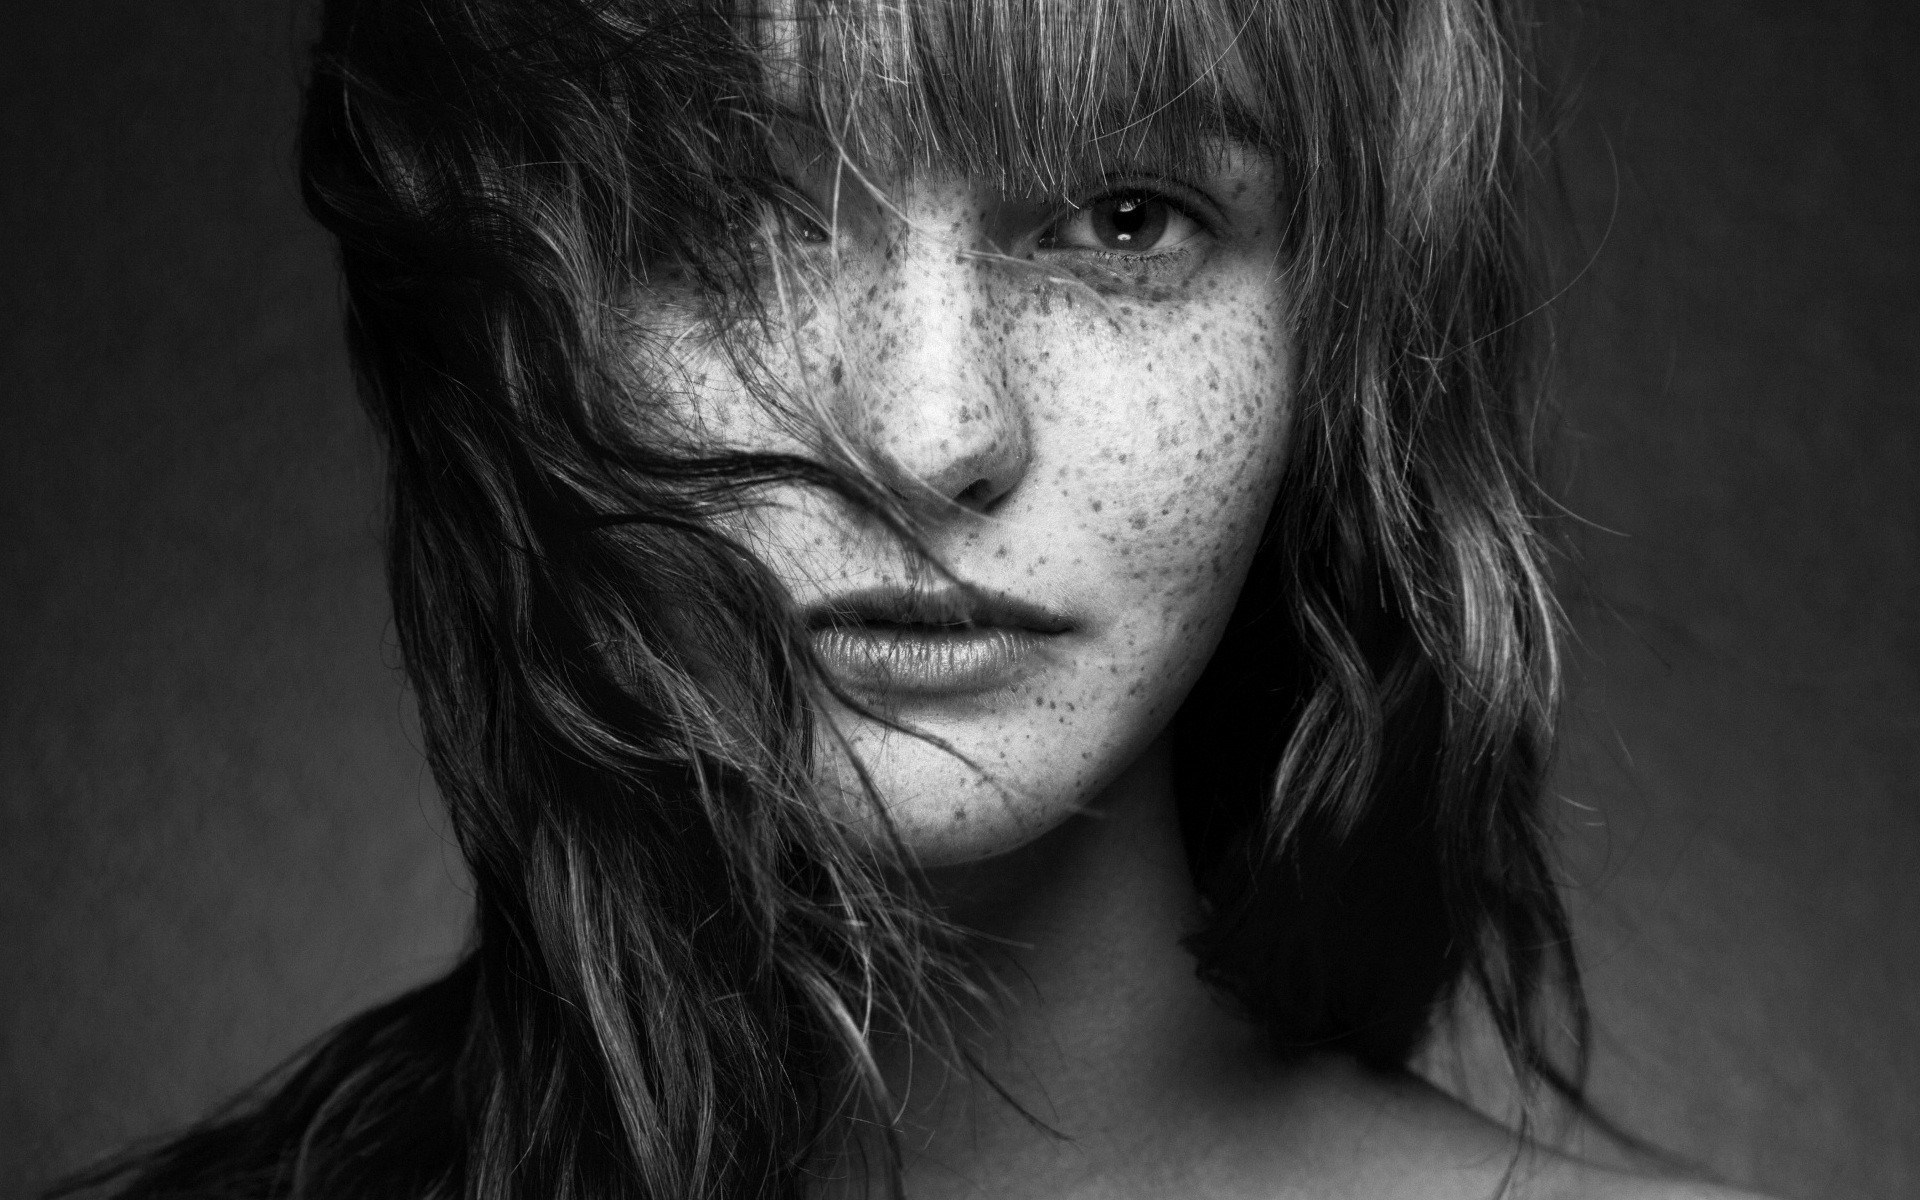 Beauty Girl with Freckles Portrait Photo